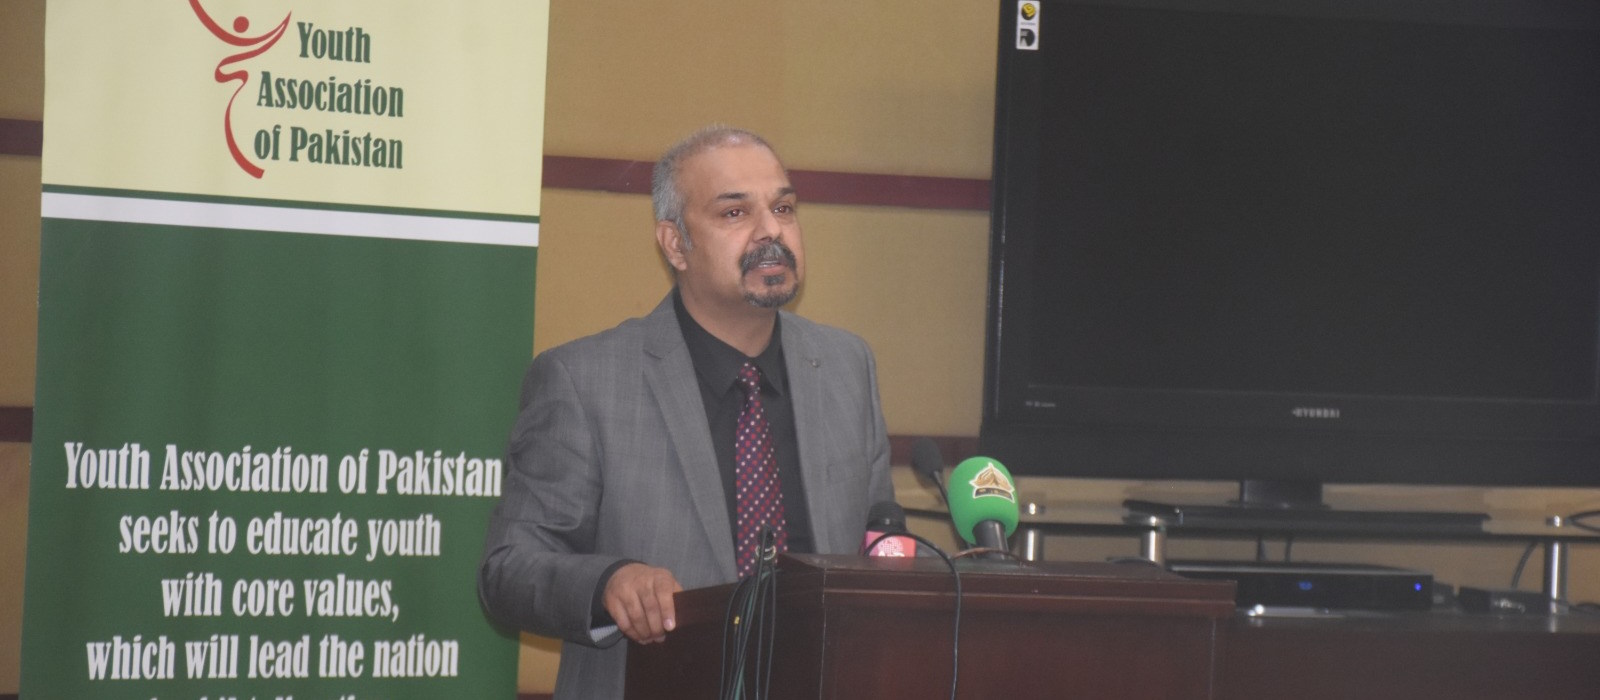 Dr. Inayat Kalim, Hod Humanities speaking at the Pehchan Pakistan Conference at CUI